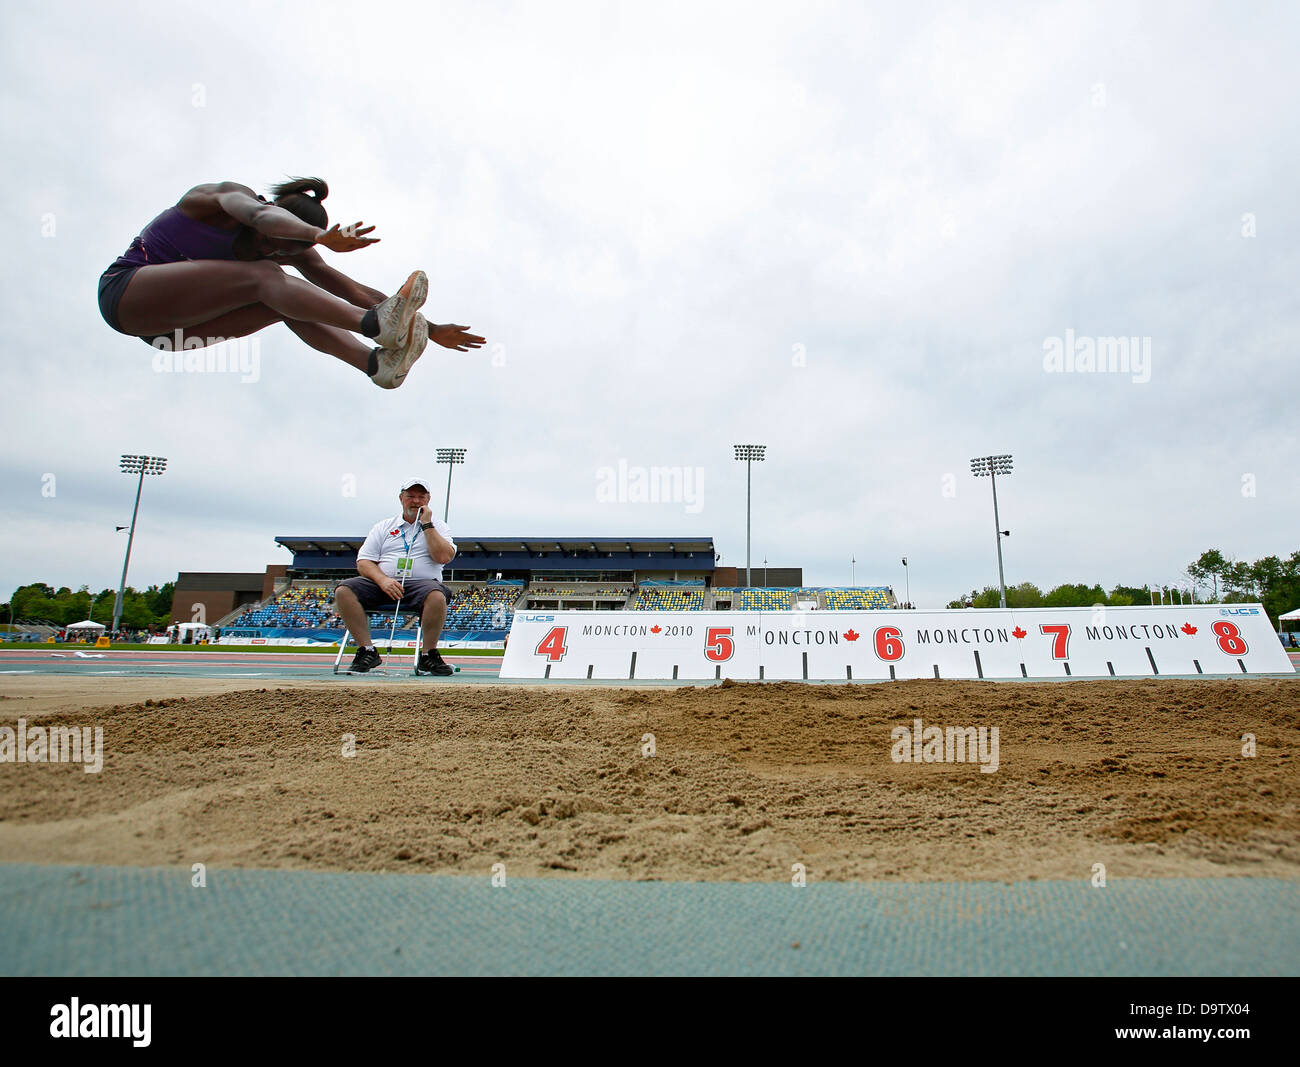 Heptathlon long jumper Tamara Cap competes at the Canadian Track & Field Championships June 22, 2013 in Moncton, Canada. Stock Photo